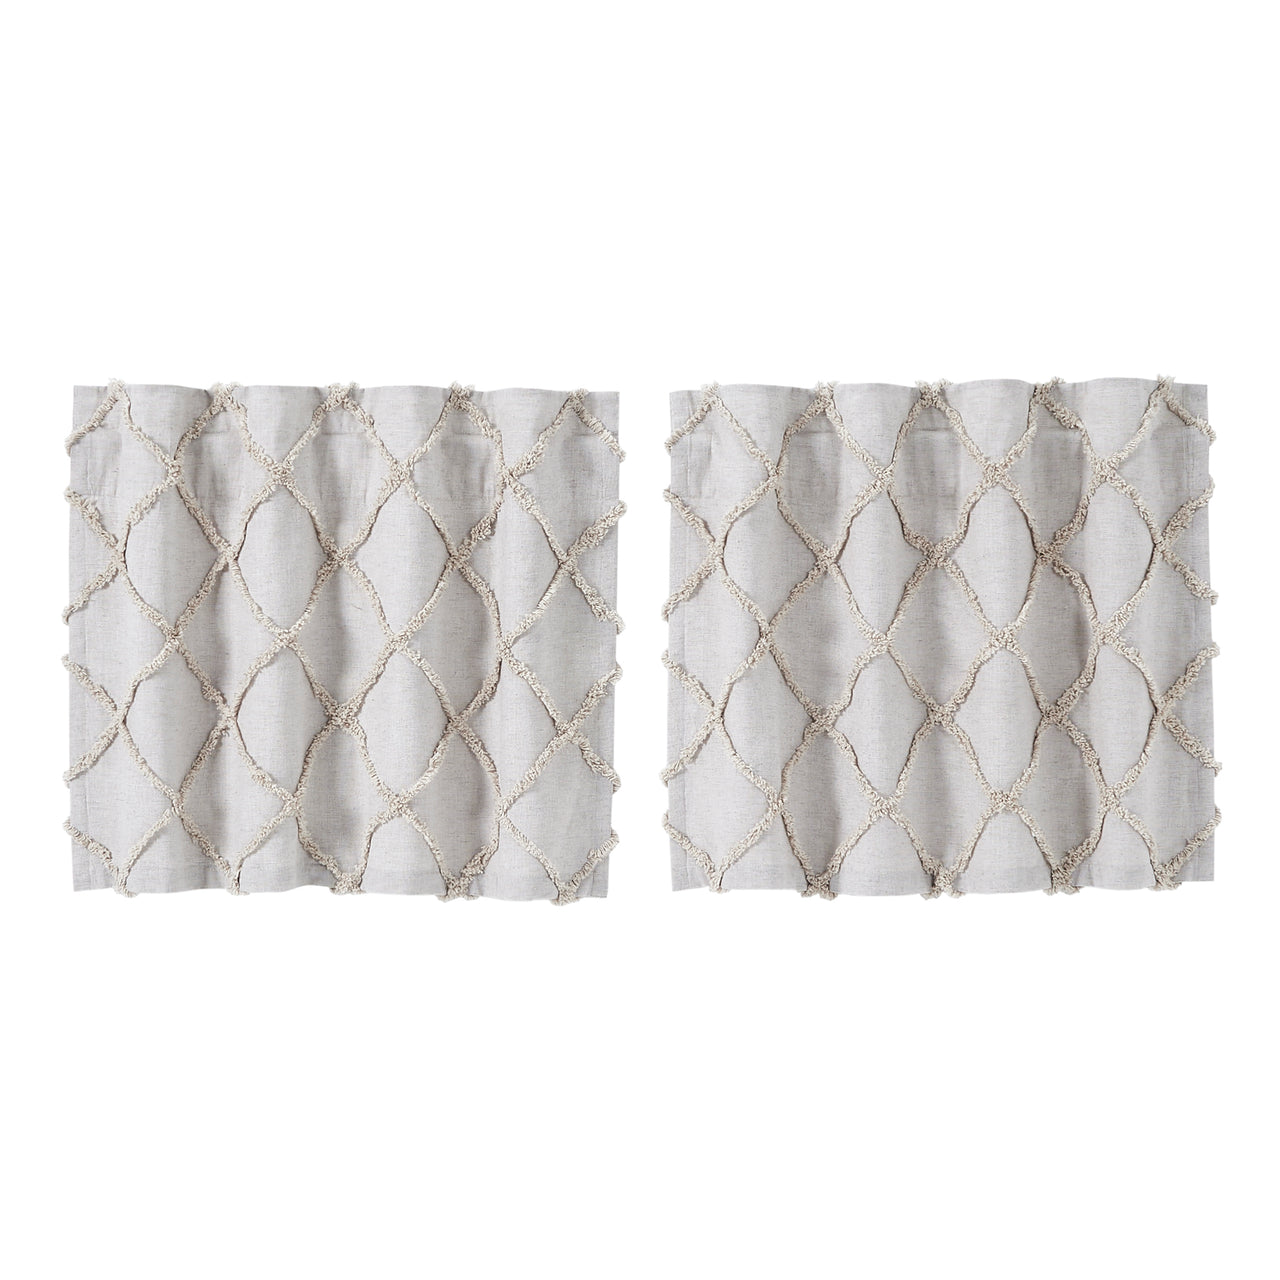 Frayed Lattice Oatmeal Tier Set of 2 L24xW36 VHC Brands